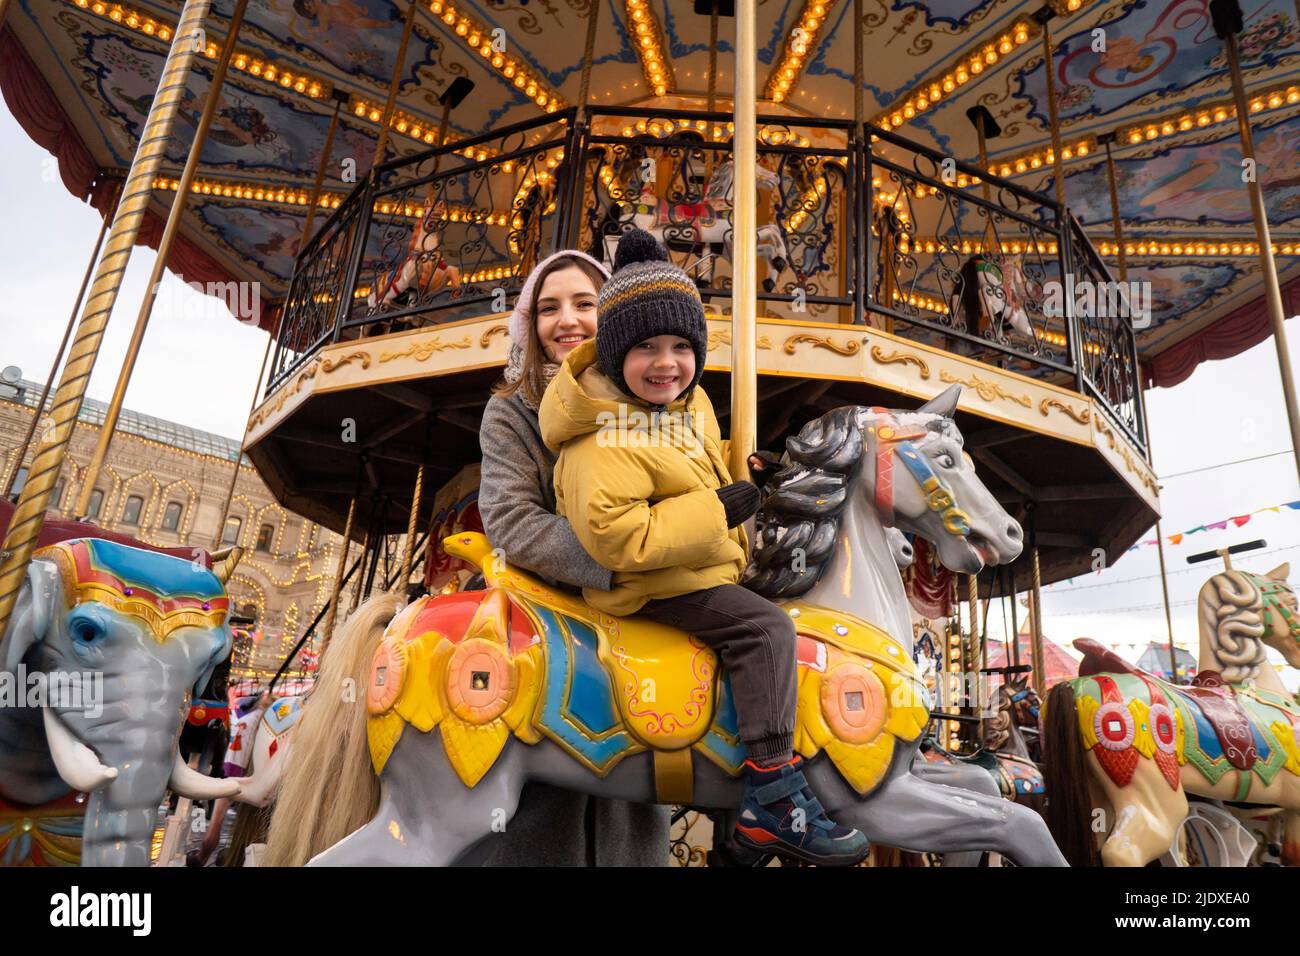 Smiling boy on carousel horse by mother in Christmas market Stock Photo